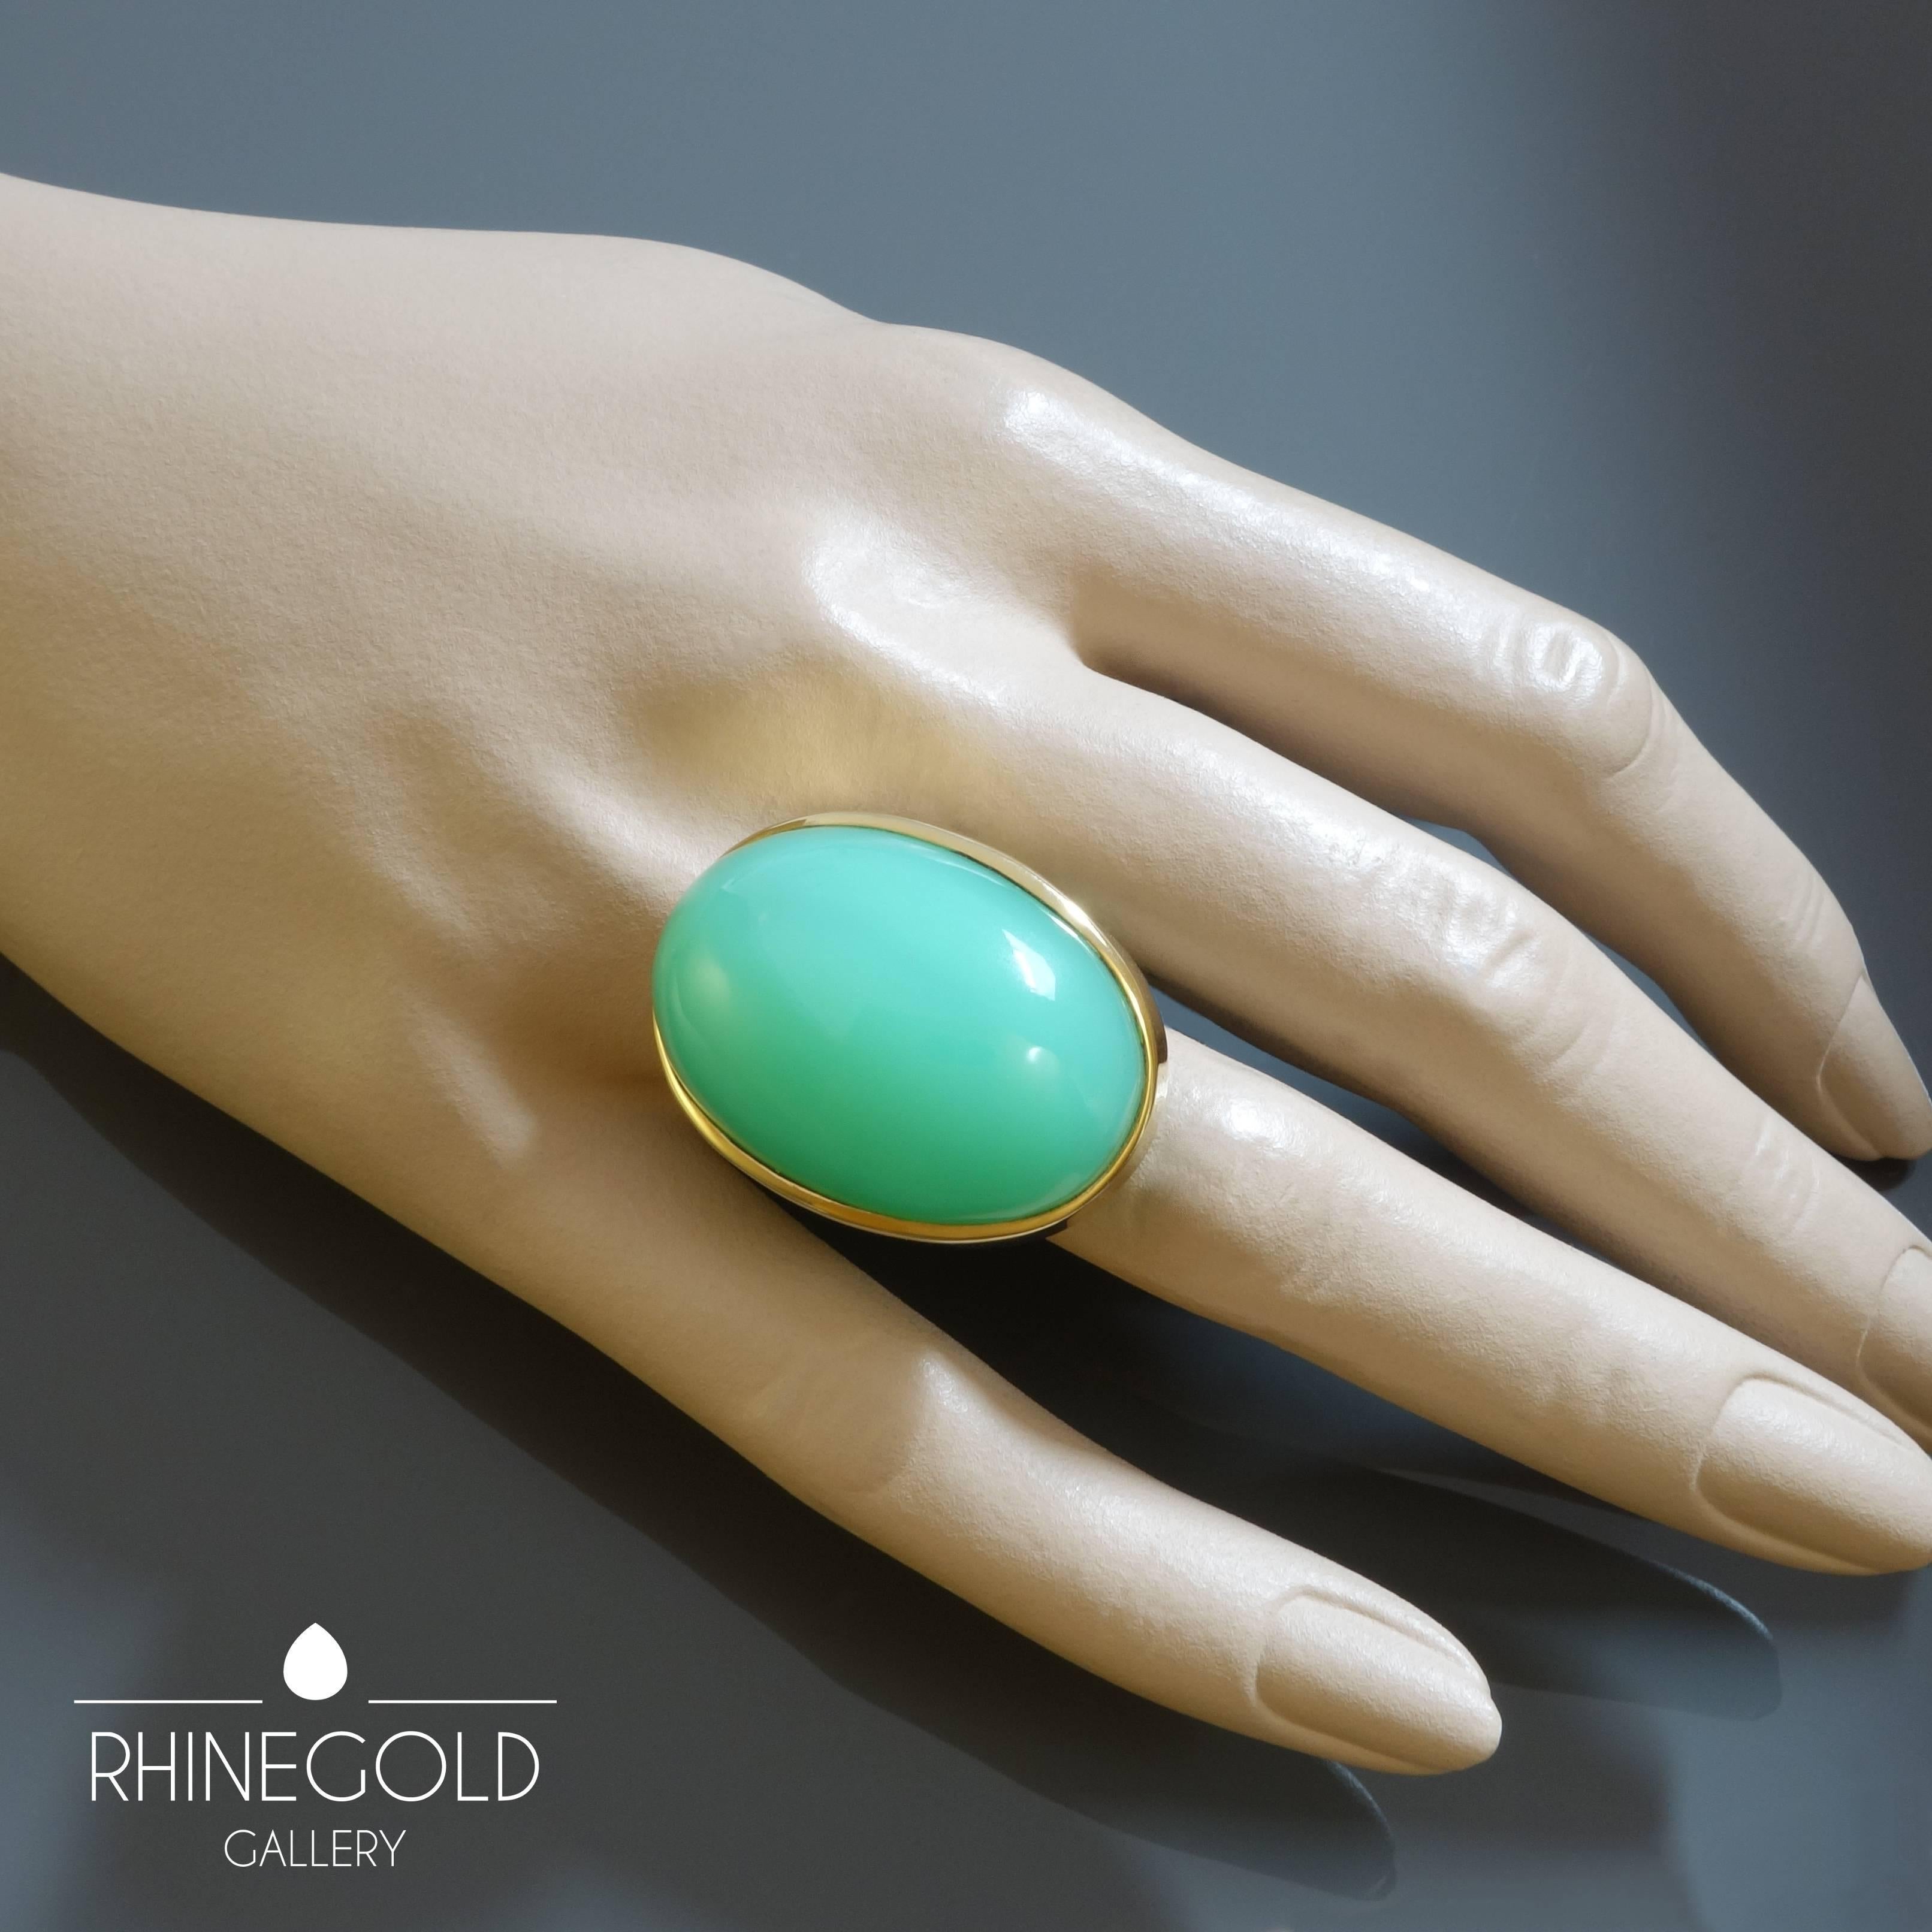 1970s Jade Green 48.5 Carat Chrysoprase Gold Cocktail Ring
18k yellow gold, chrysoprase cabochon (approx. 48.58 carats; estimated in its setting)
Ring head 3.1 cm by 2.3 cm (approx. 1 1/4” by 7/8”)
Ring size: Ø 16.9 mm = EU 53.1 / US 6 1/2 / ASIA